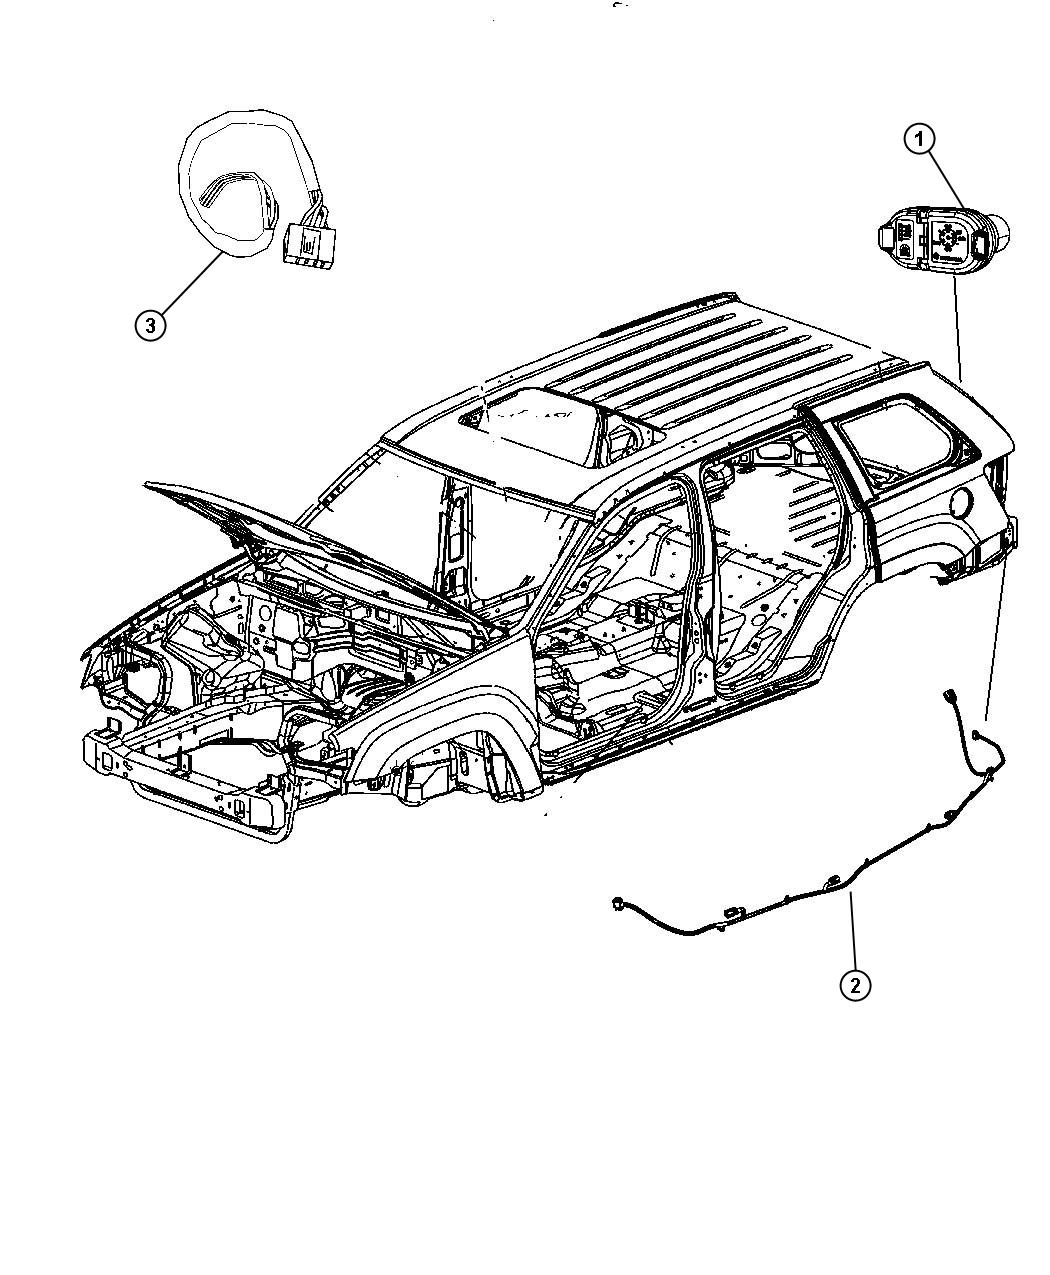 Wiring Chasis and Underbody. Diagram